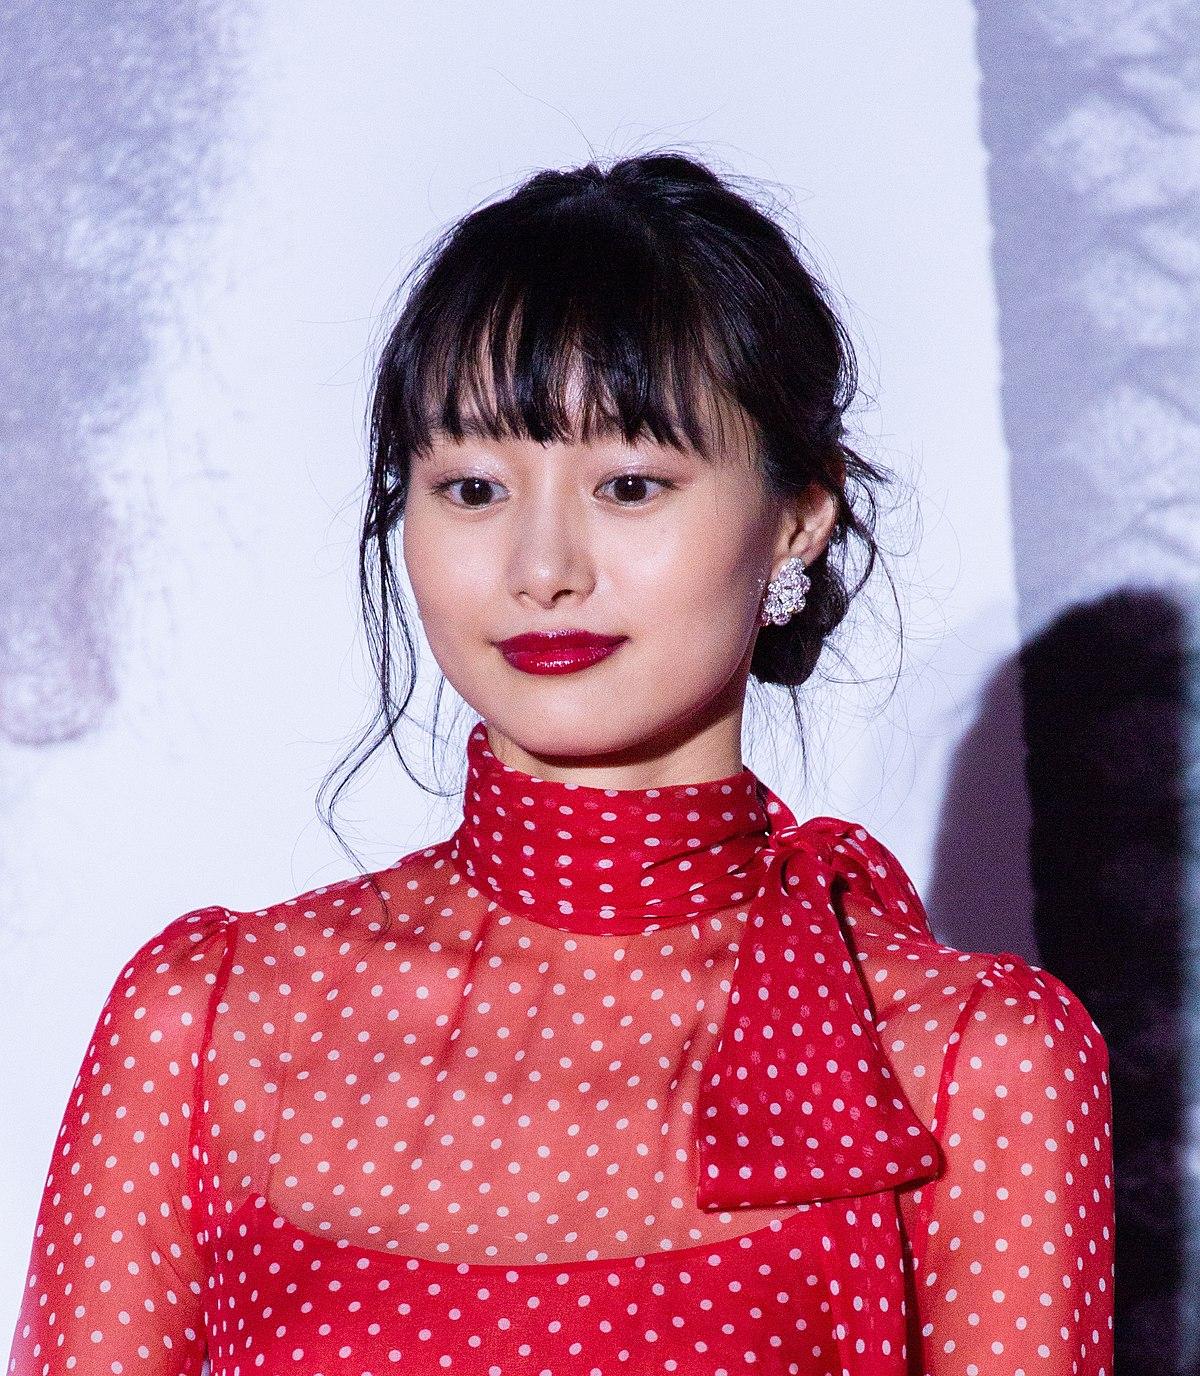 20+ Hot Pictures Of Yukio a.k.a Shiori Kutsuna From Deadpool 2 With Interesting Facts About Her 6